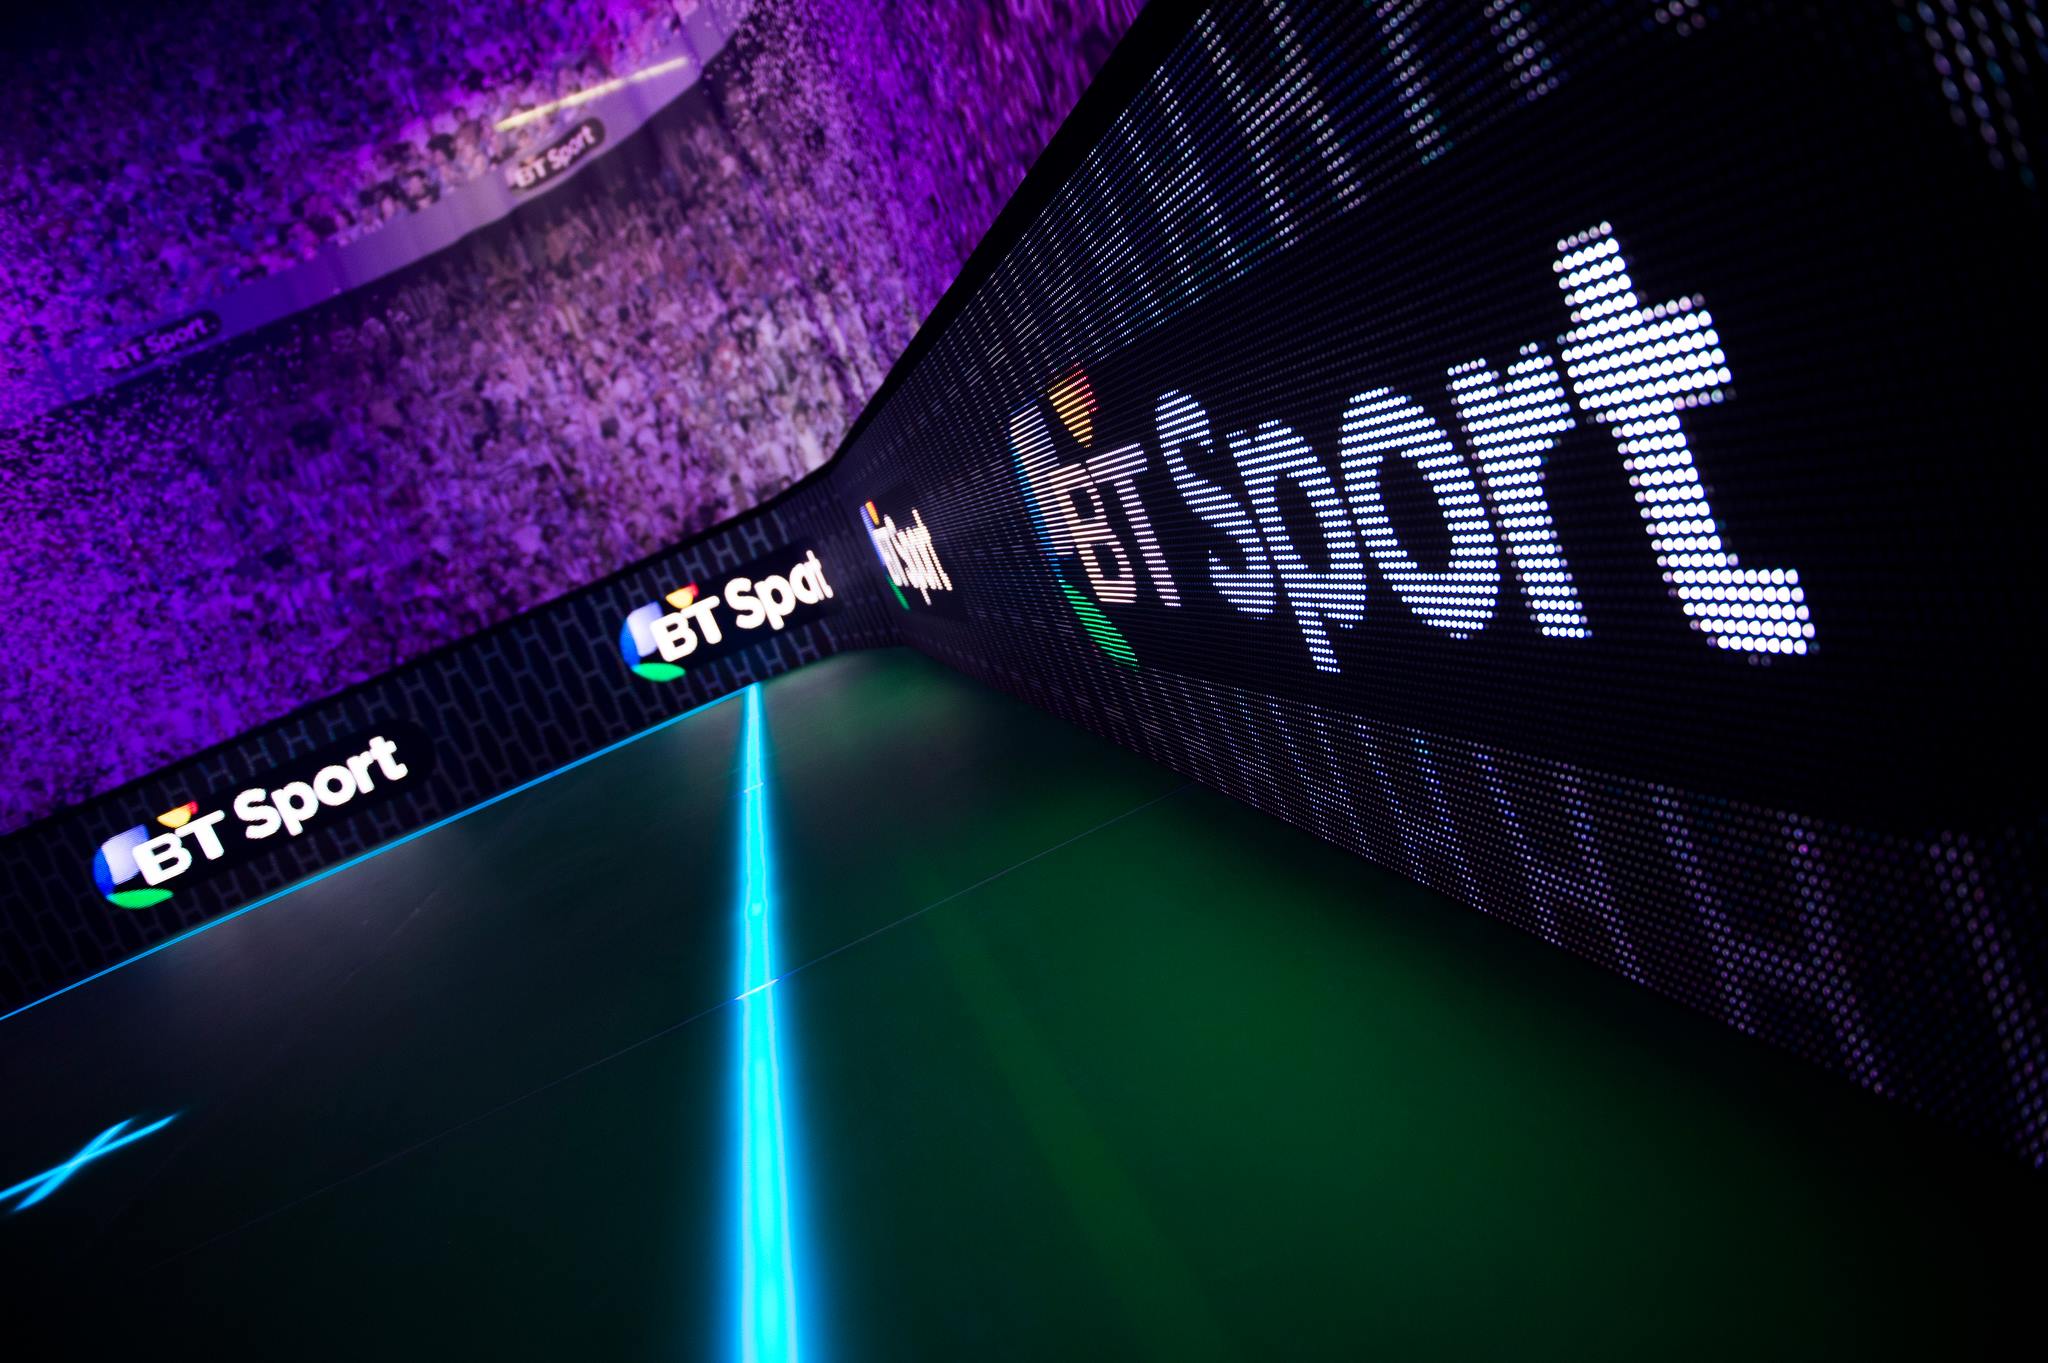 The Professional Squash Association has signed a UK broadcast deal with BT Sport ©BT Sport/Facebook